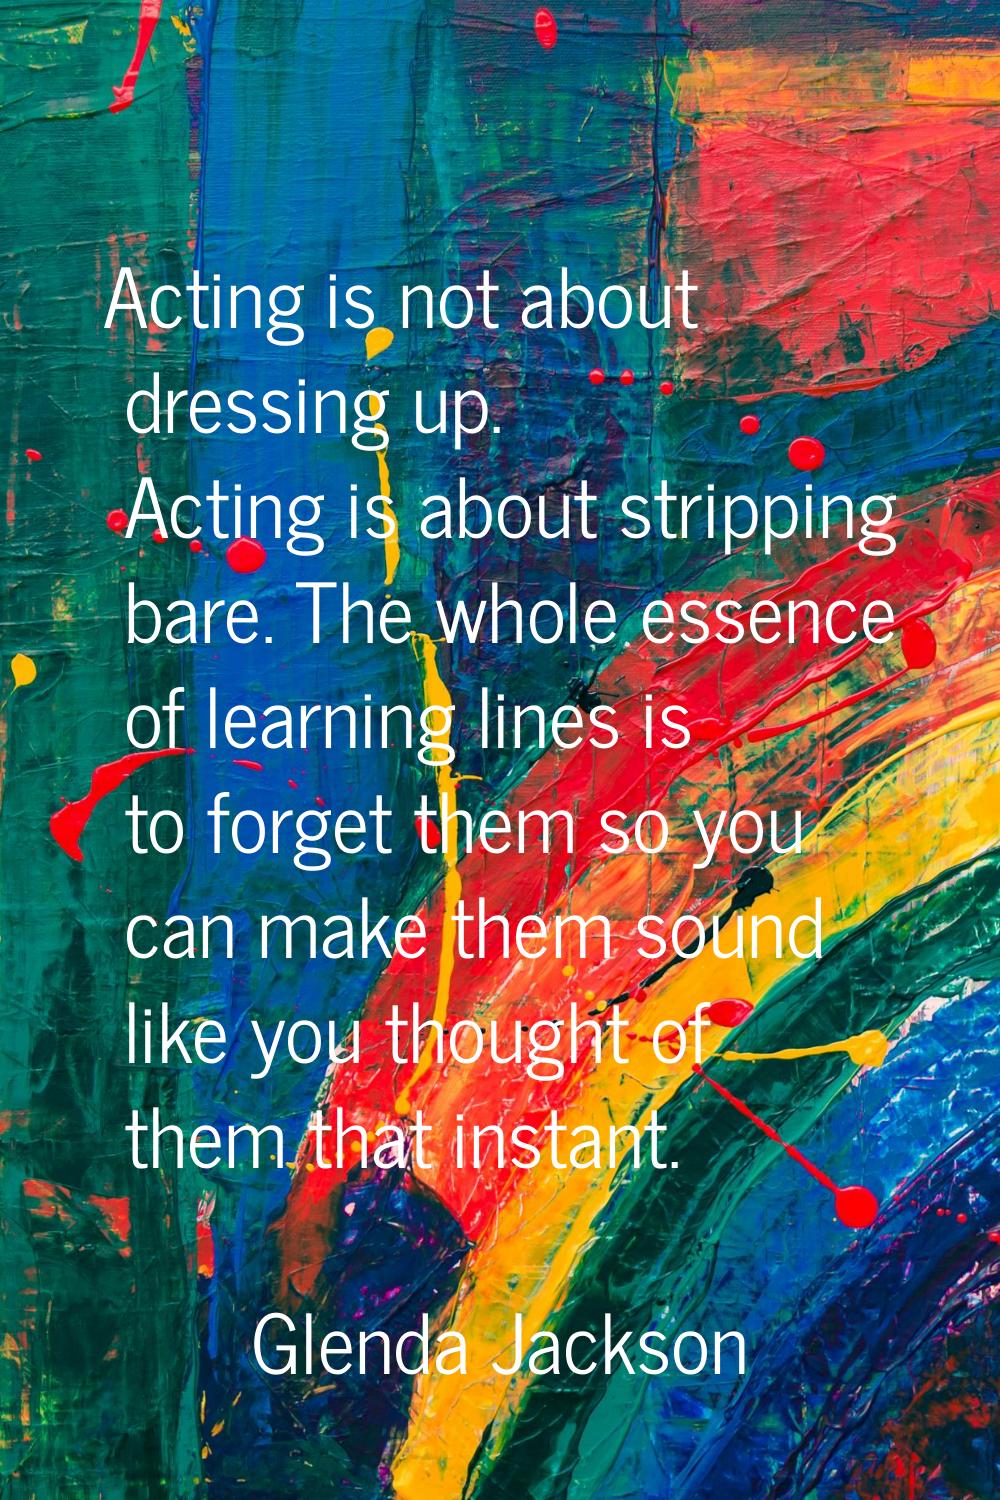 Acting is not about dressing up. Acting is about stripping bare. The whole essence of learning line